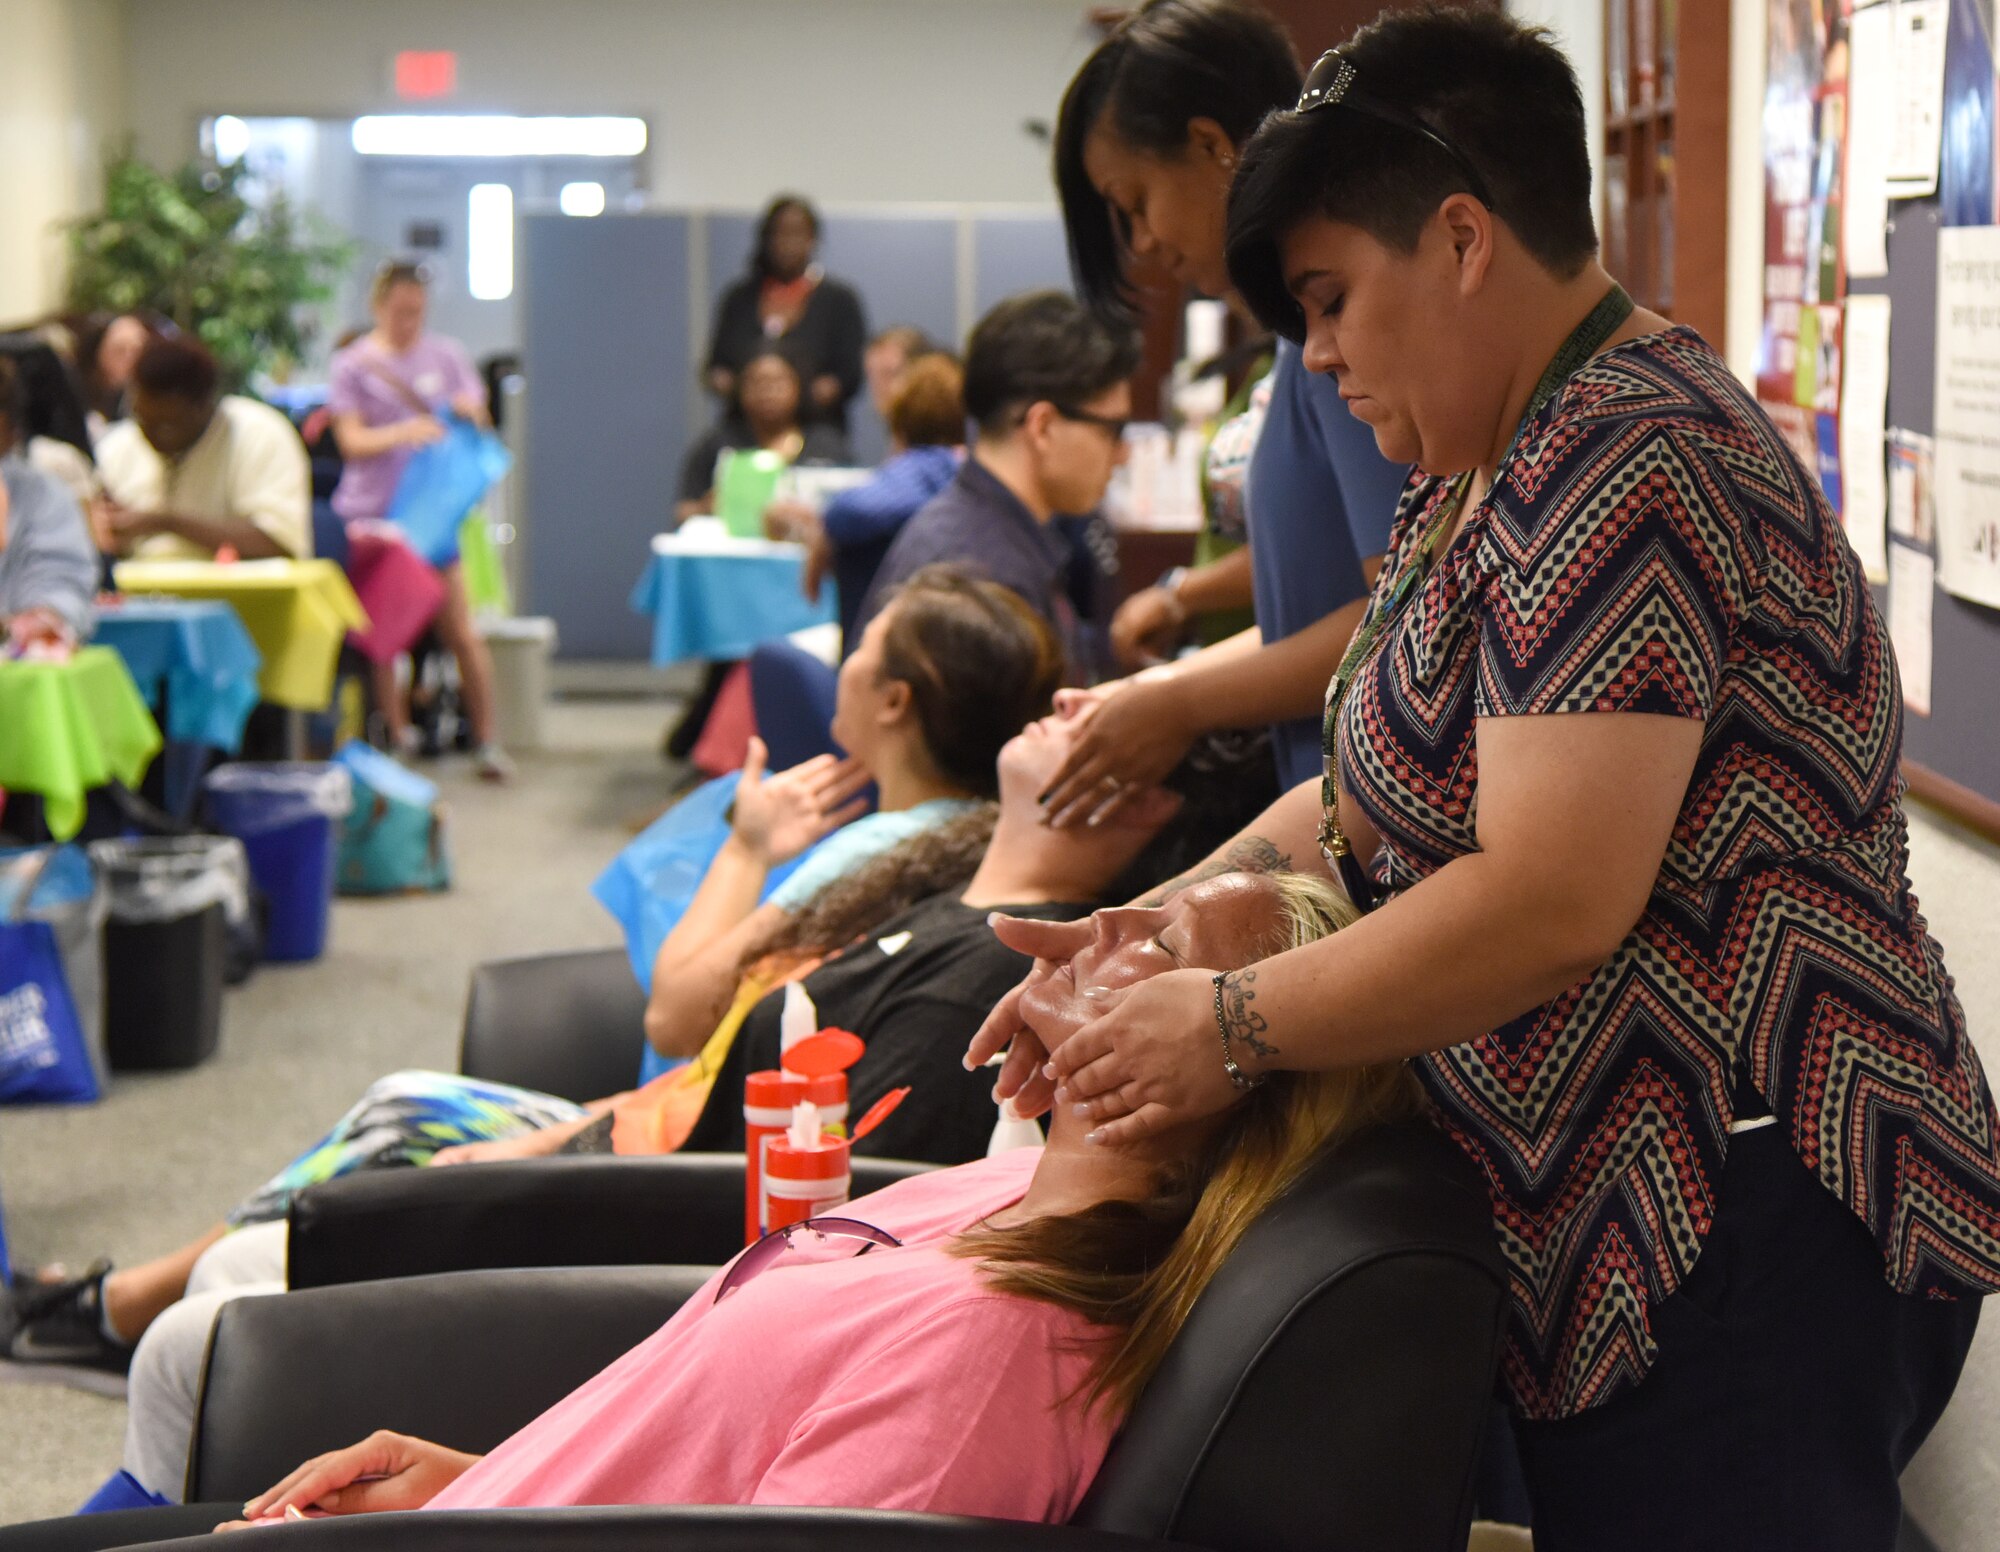 Students from Virginia College provide face massages to Keesler spouses during Pamper Me Day at the Sablich Center May 4, 2017, on Keesler Air Force Base, Miss. Keesler’s Airman and Family Readiness Center has hosted the event for the past 13 years, offering spouses free manicures, make-up styling tips and information and business booths. (U.S. Air Force photo by Kemberly Groue)